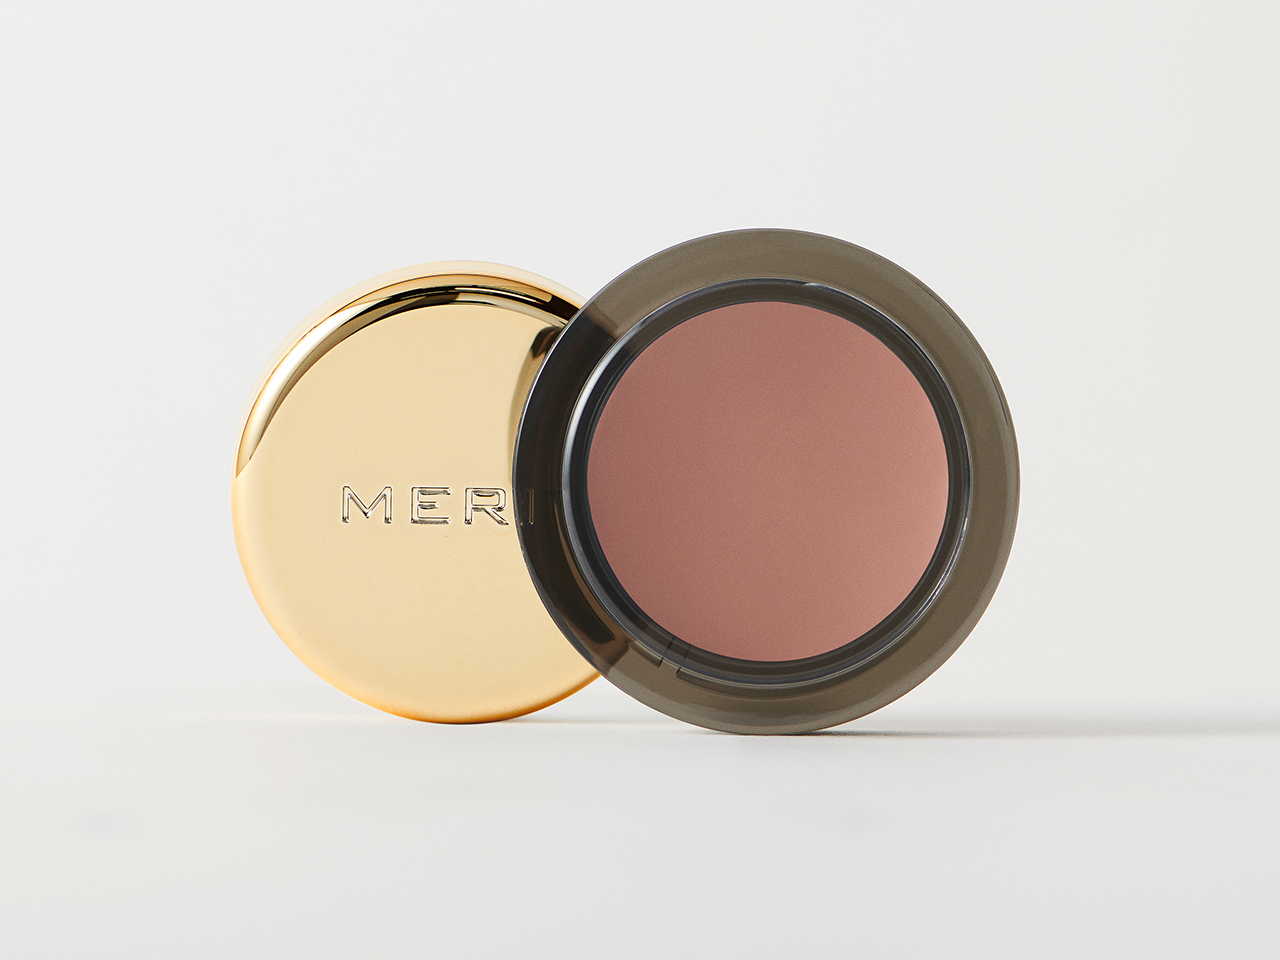 Merit Solo Shadow matte eyeshadow in Studio, a cool-taupe